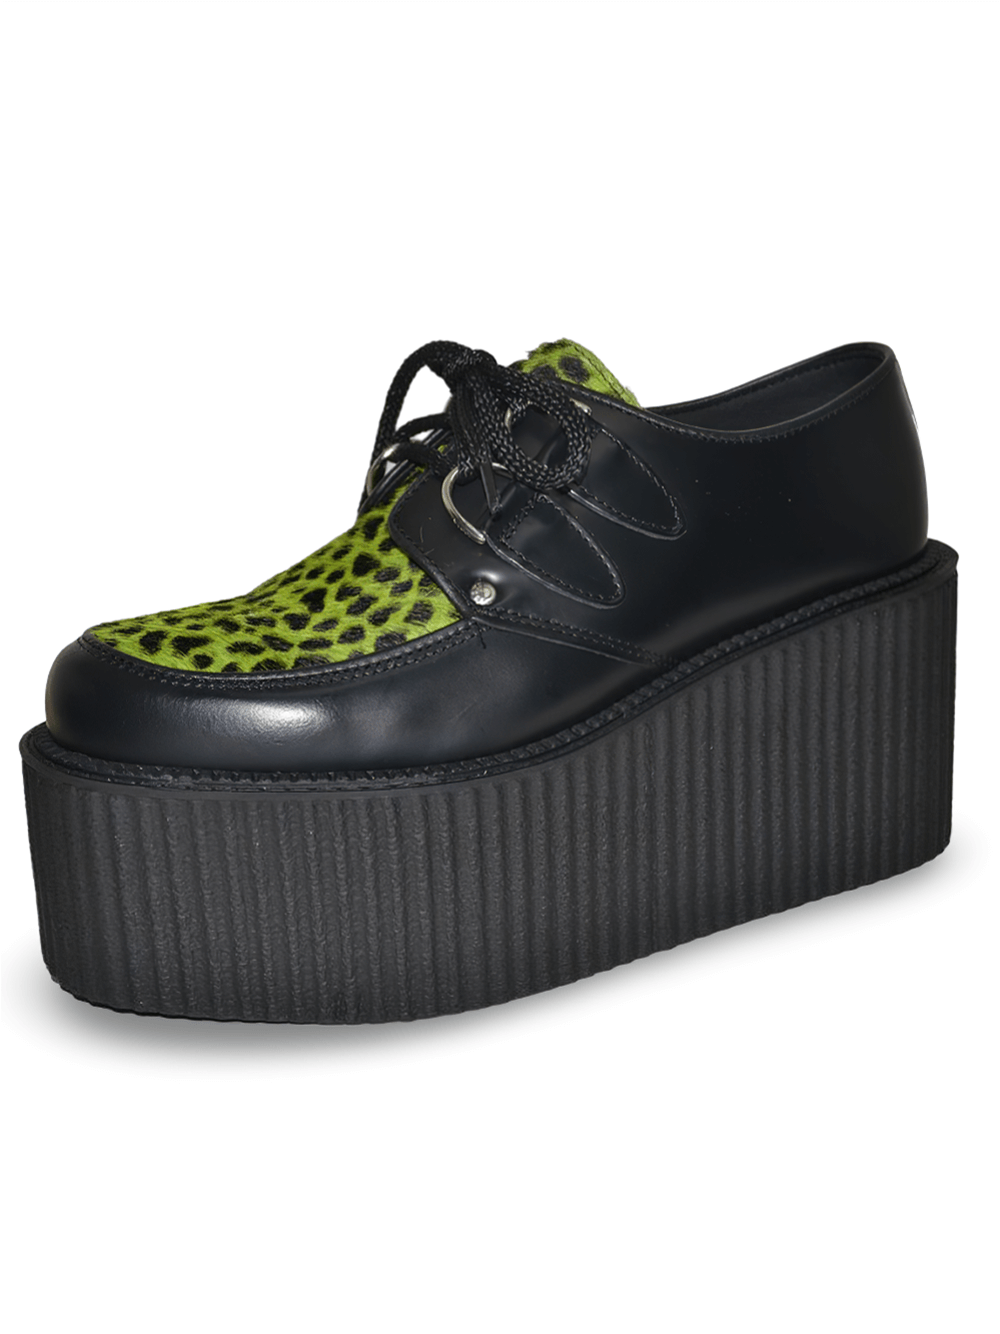 Lace-Up Black and Green Bovine Leather Creepers